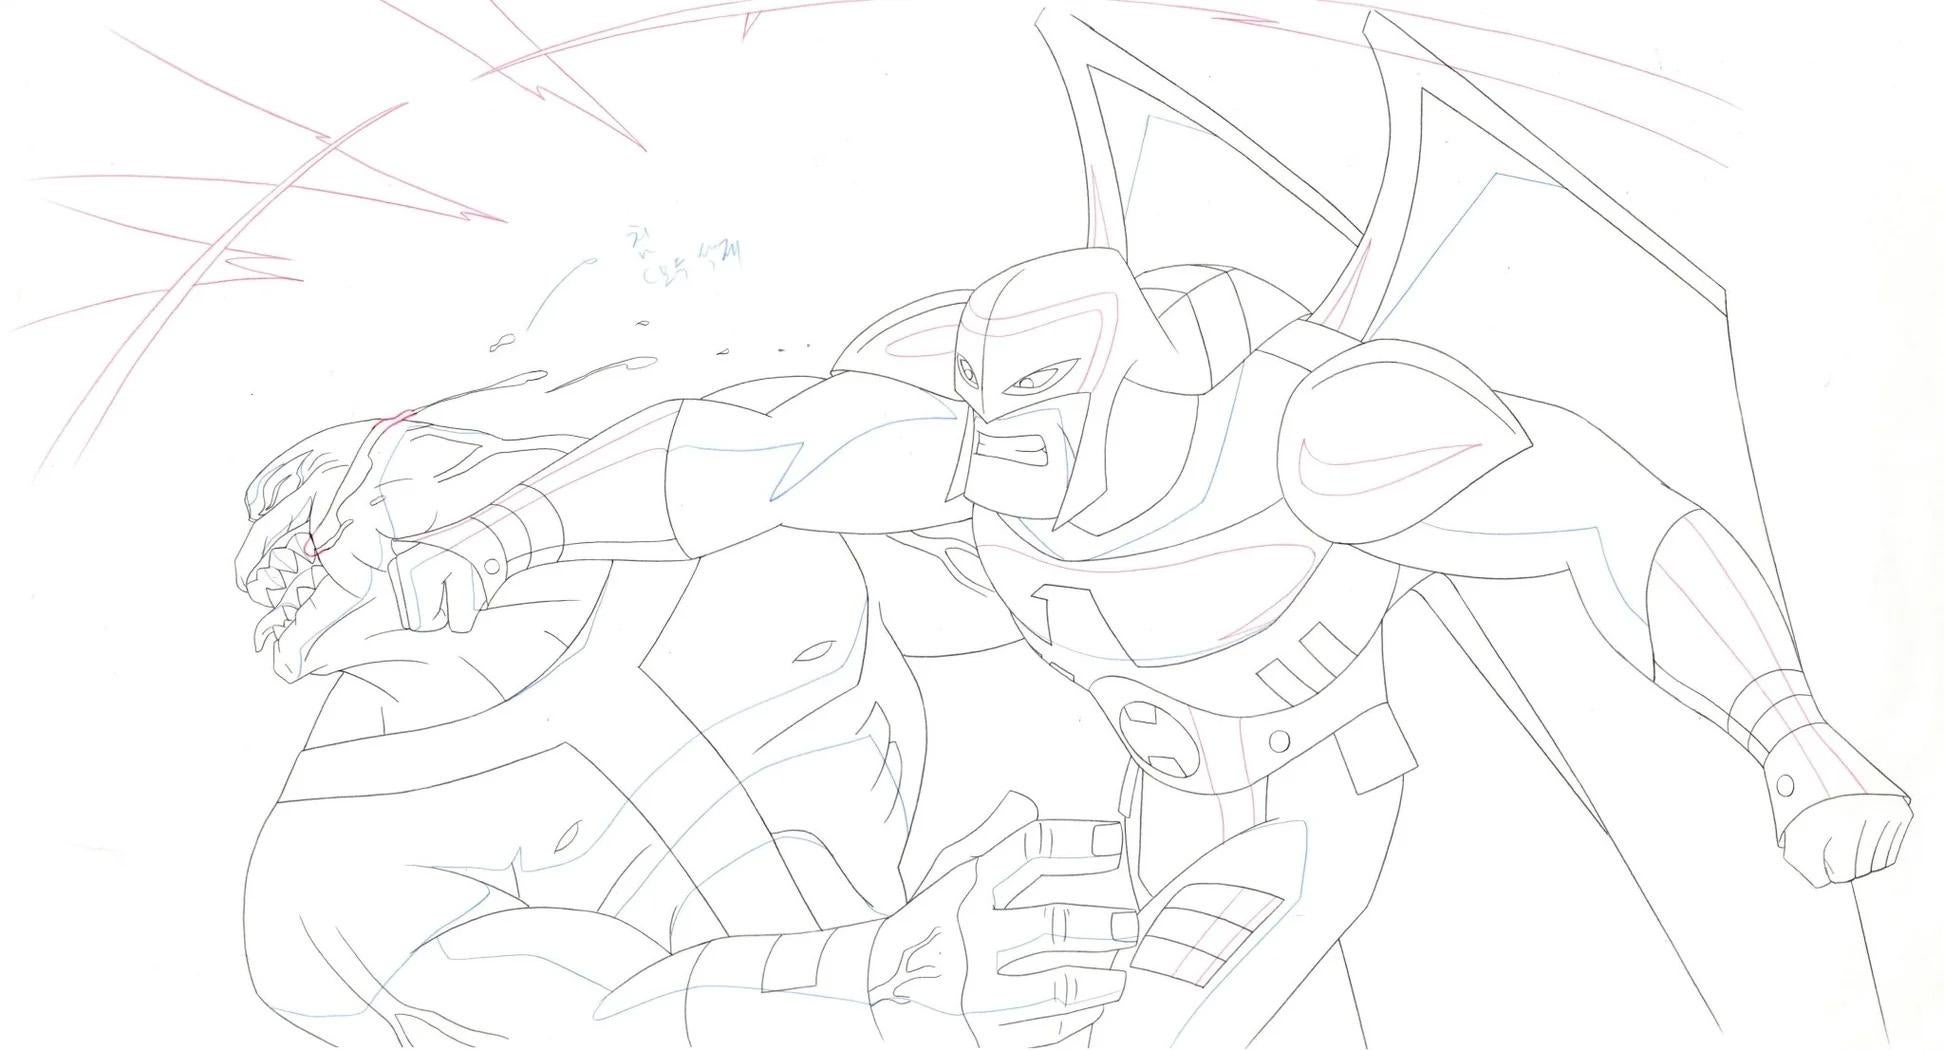 Justice League Unlimited Original Production Drawing: Warhawk and Parasite 2 - Art by DC Comics Studio Artists